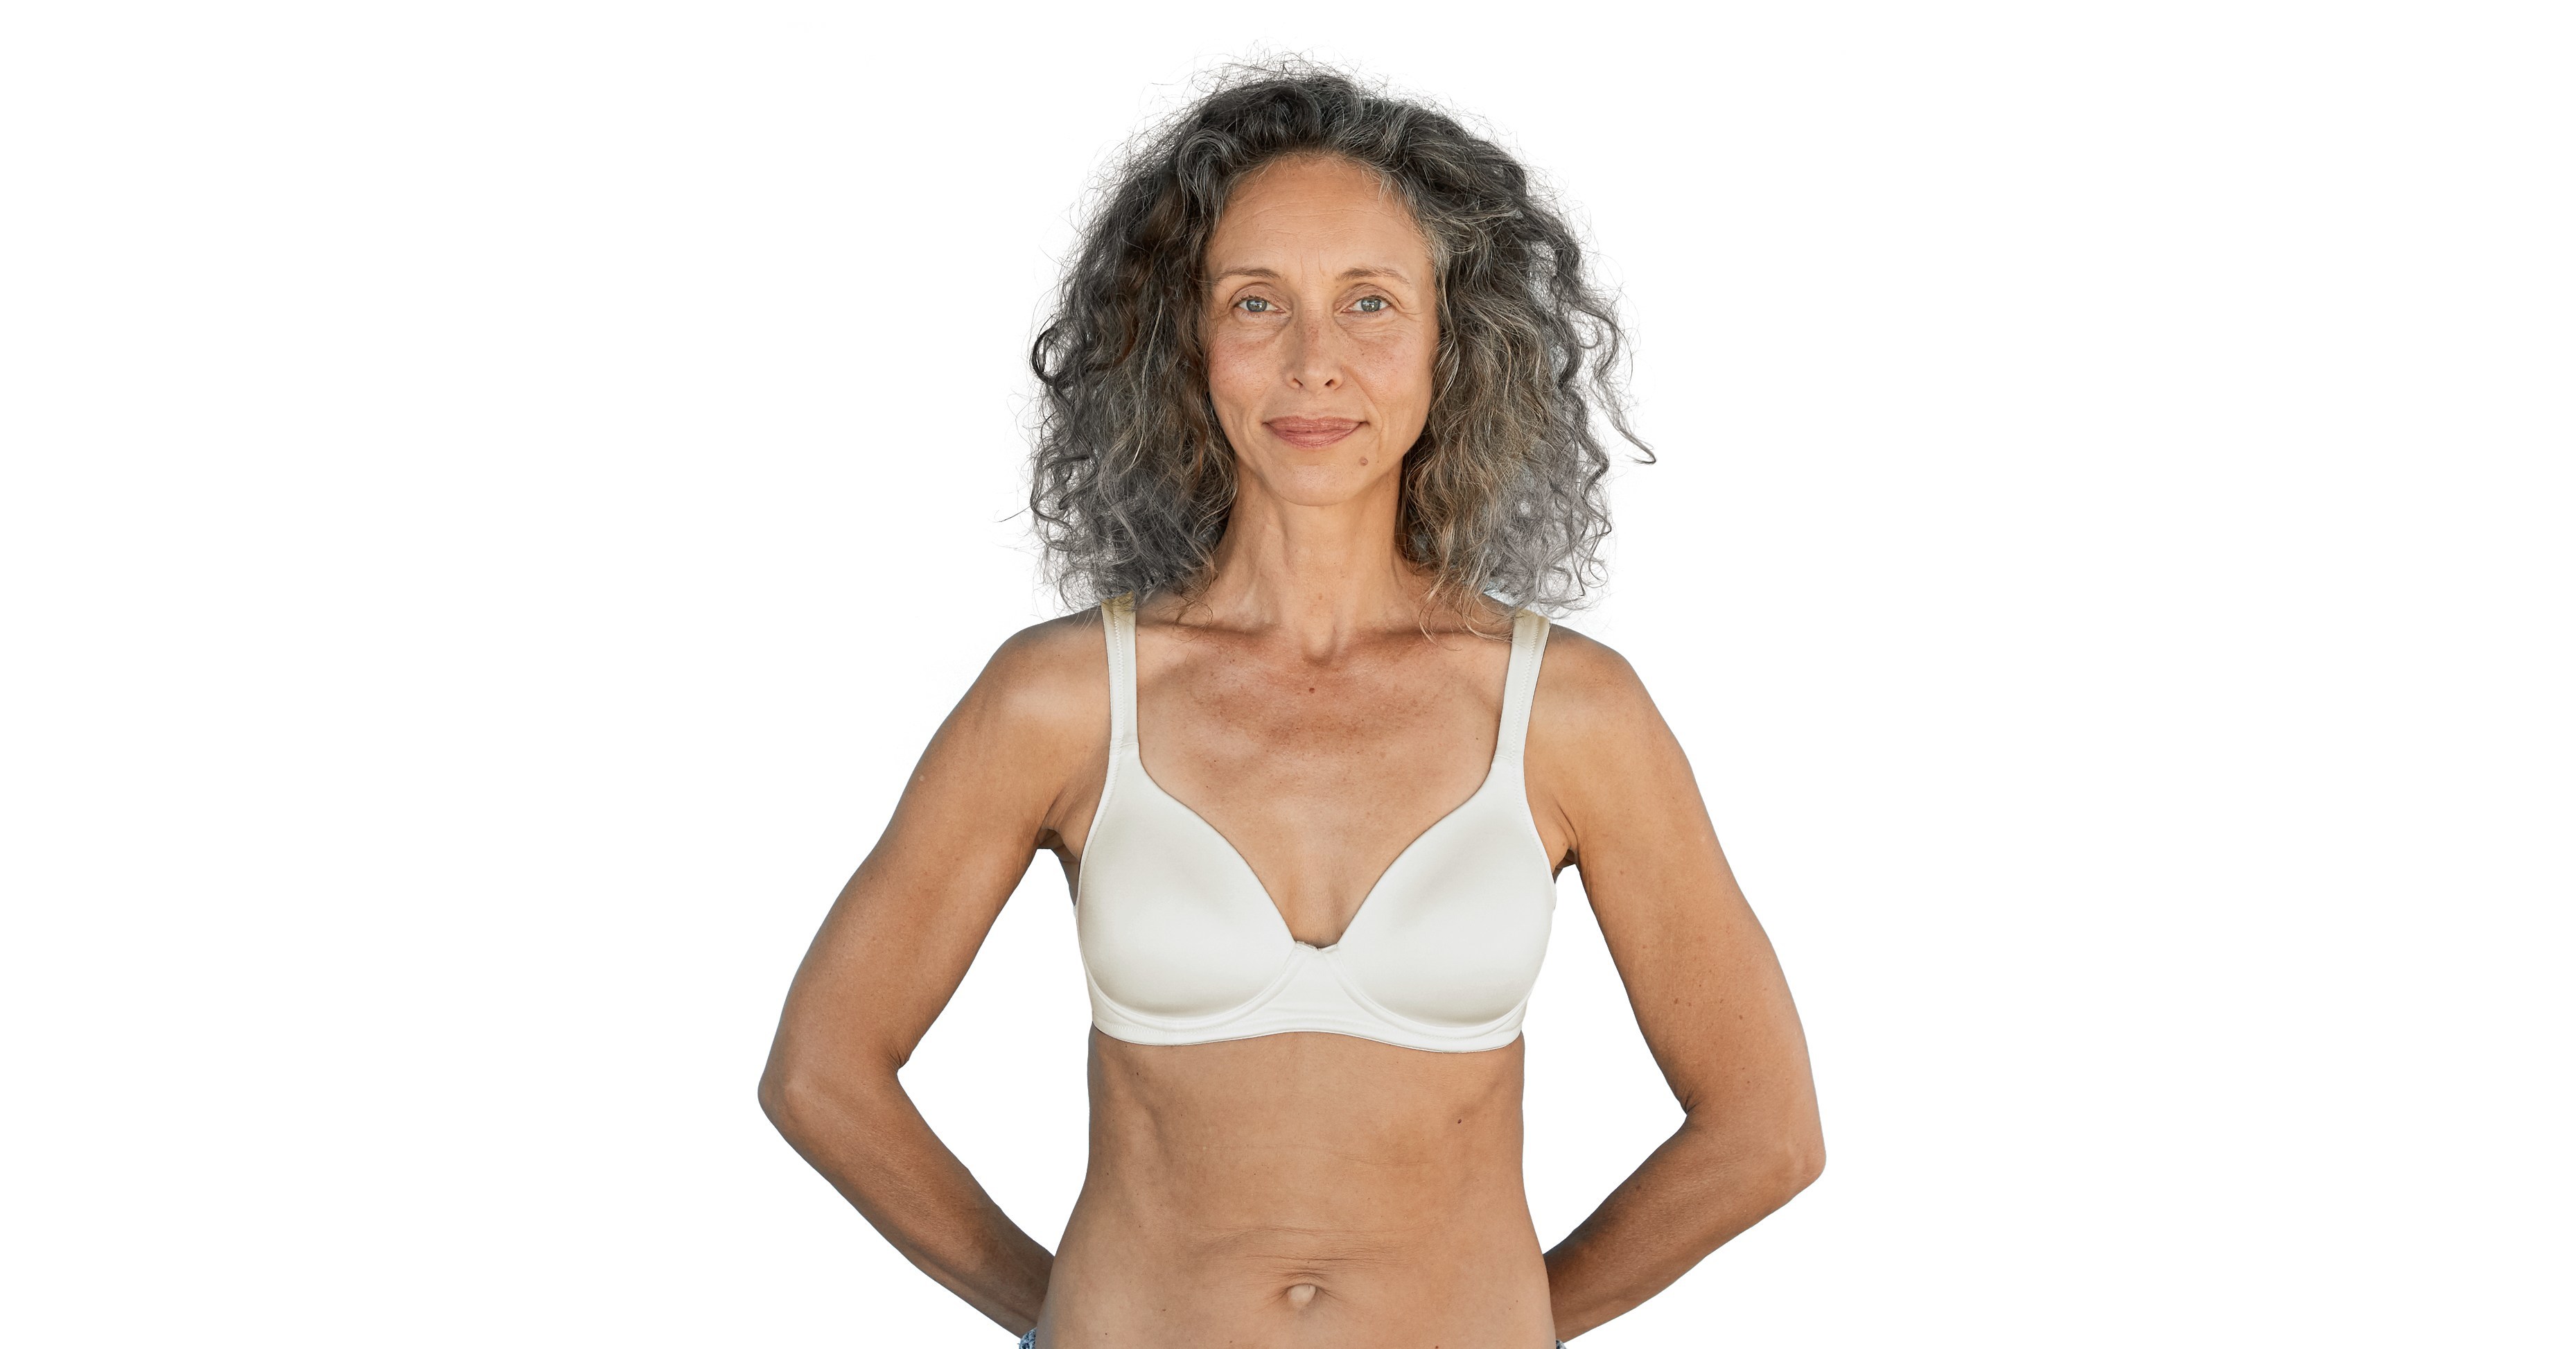 The Vibrant Body Company Launches World's First Clean Bra